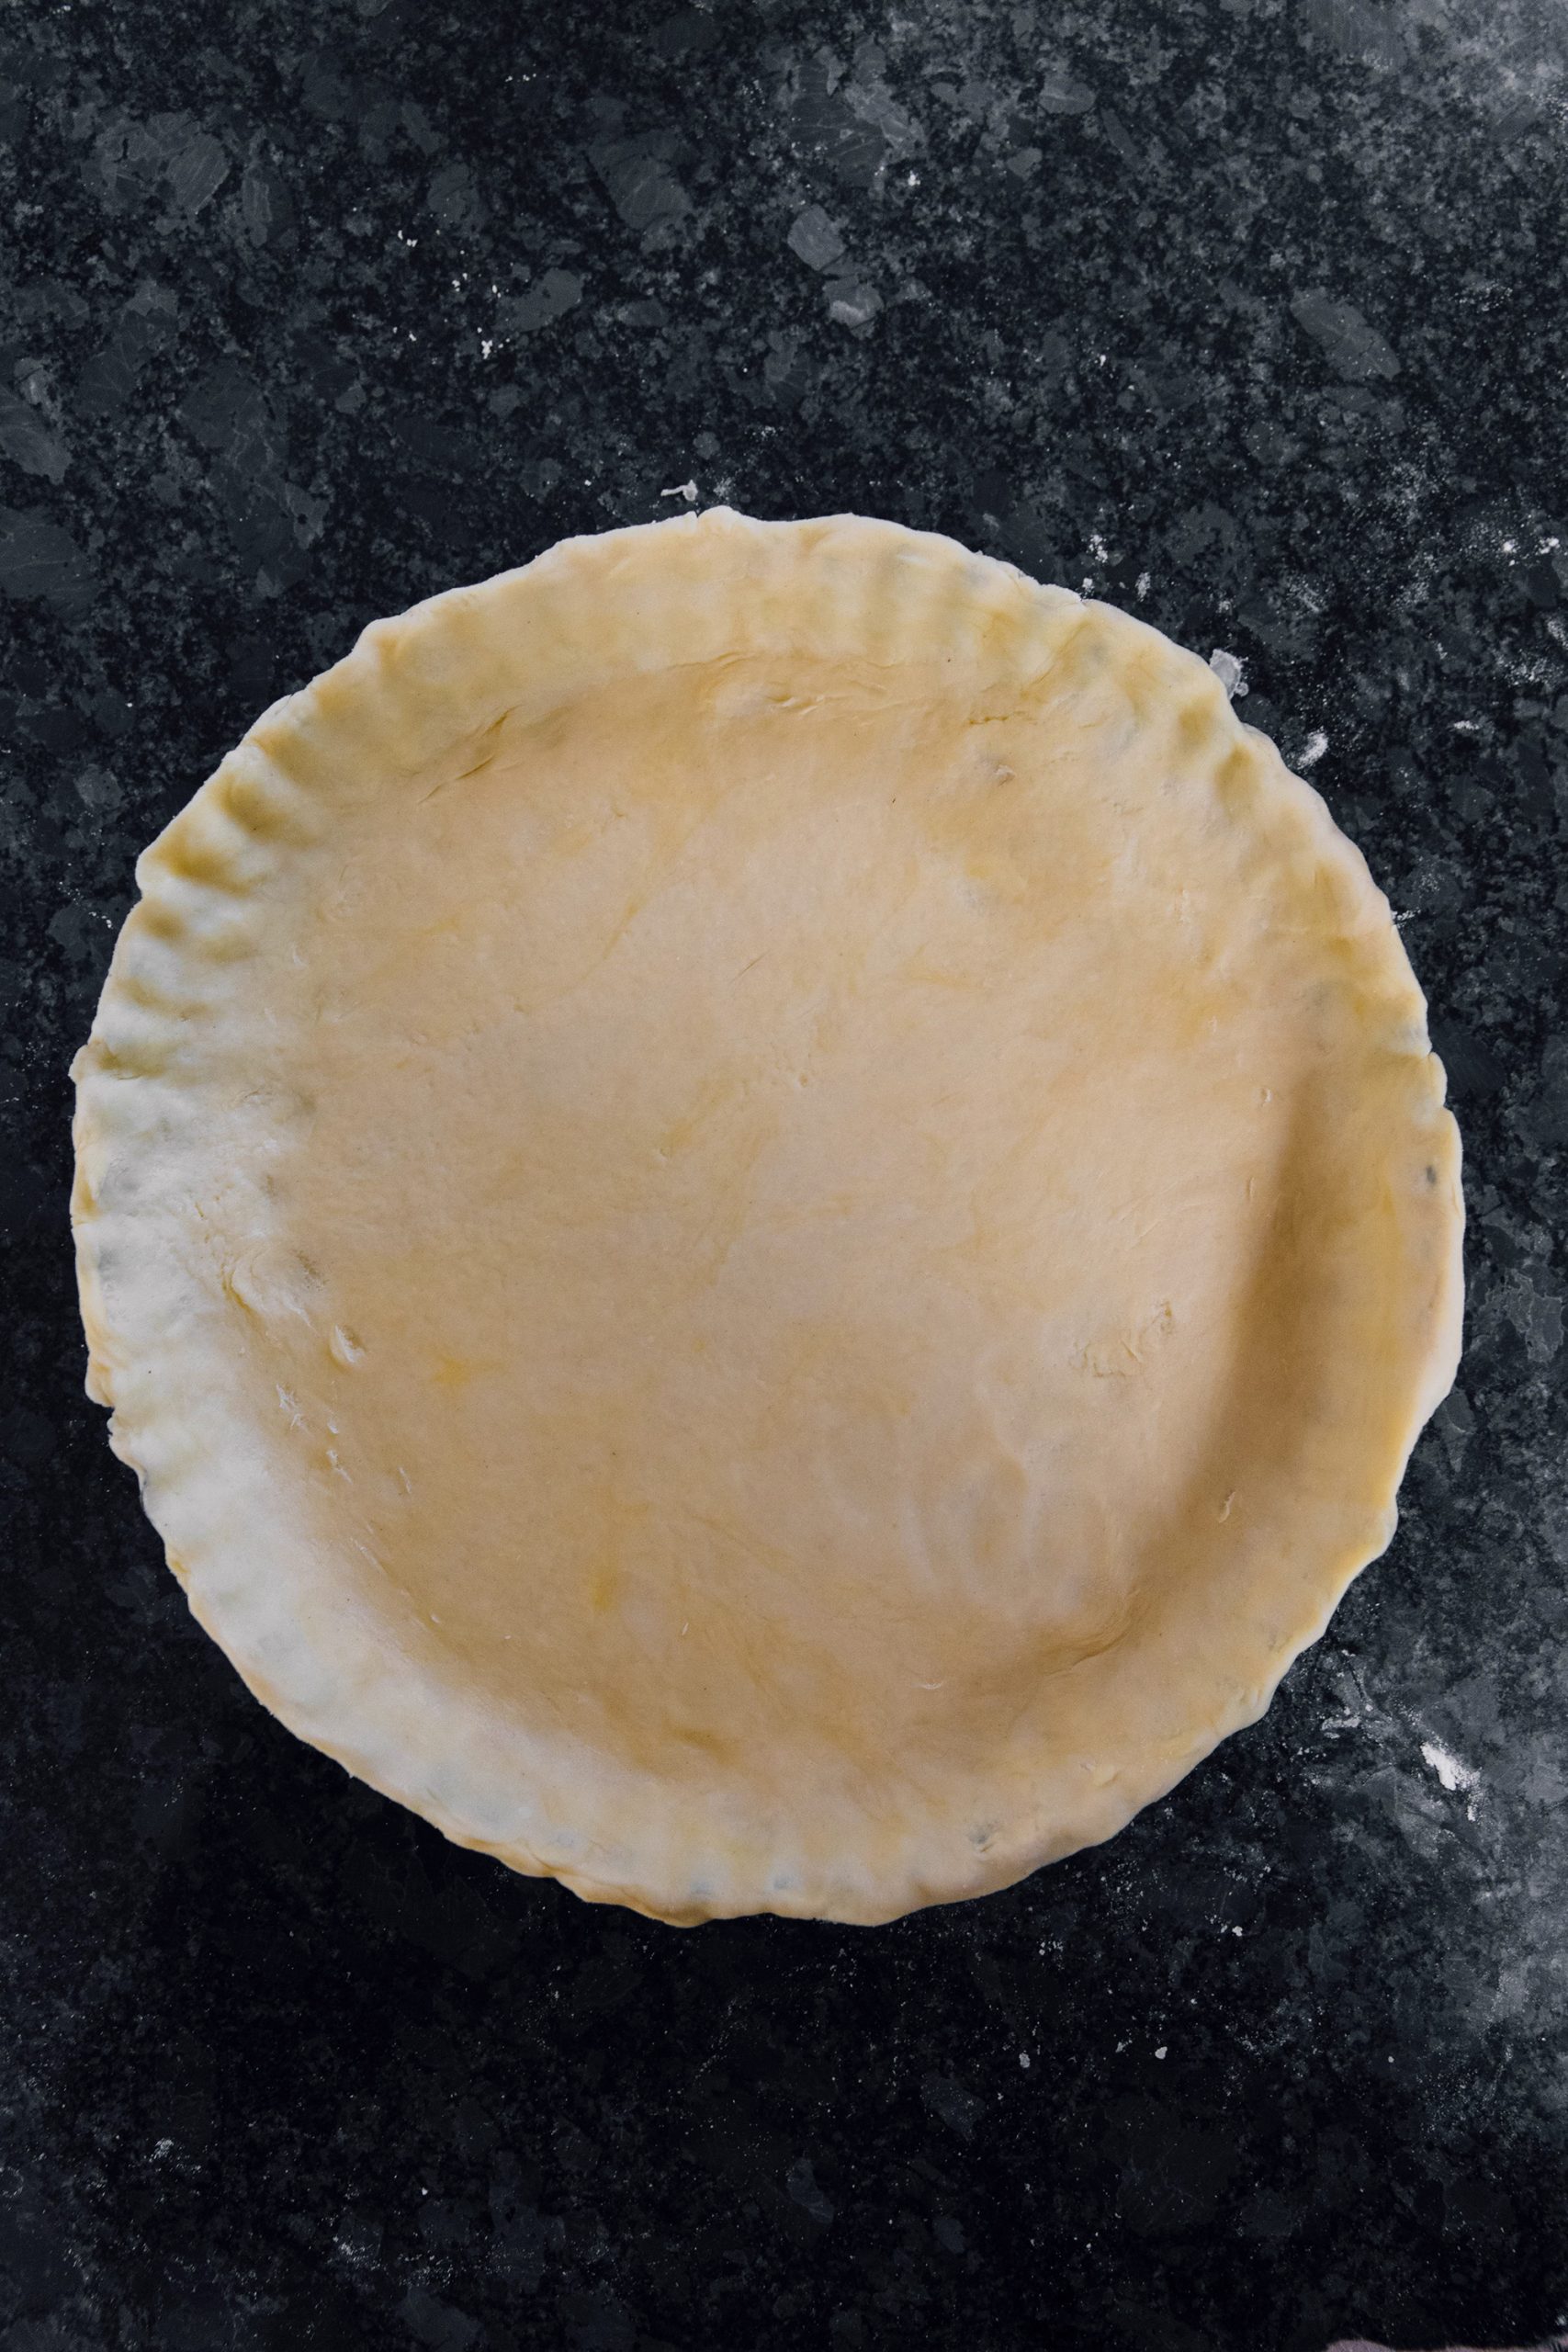 Roll into an 11-inch circle and place on a floured surface. Fill every circle with the meat mixture and cover with the remaining pastry. Seal the edges very well and bake at 450°F/235°C for 20 minutes. 